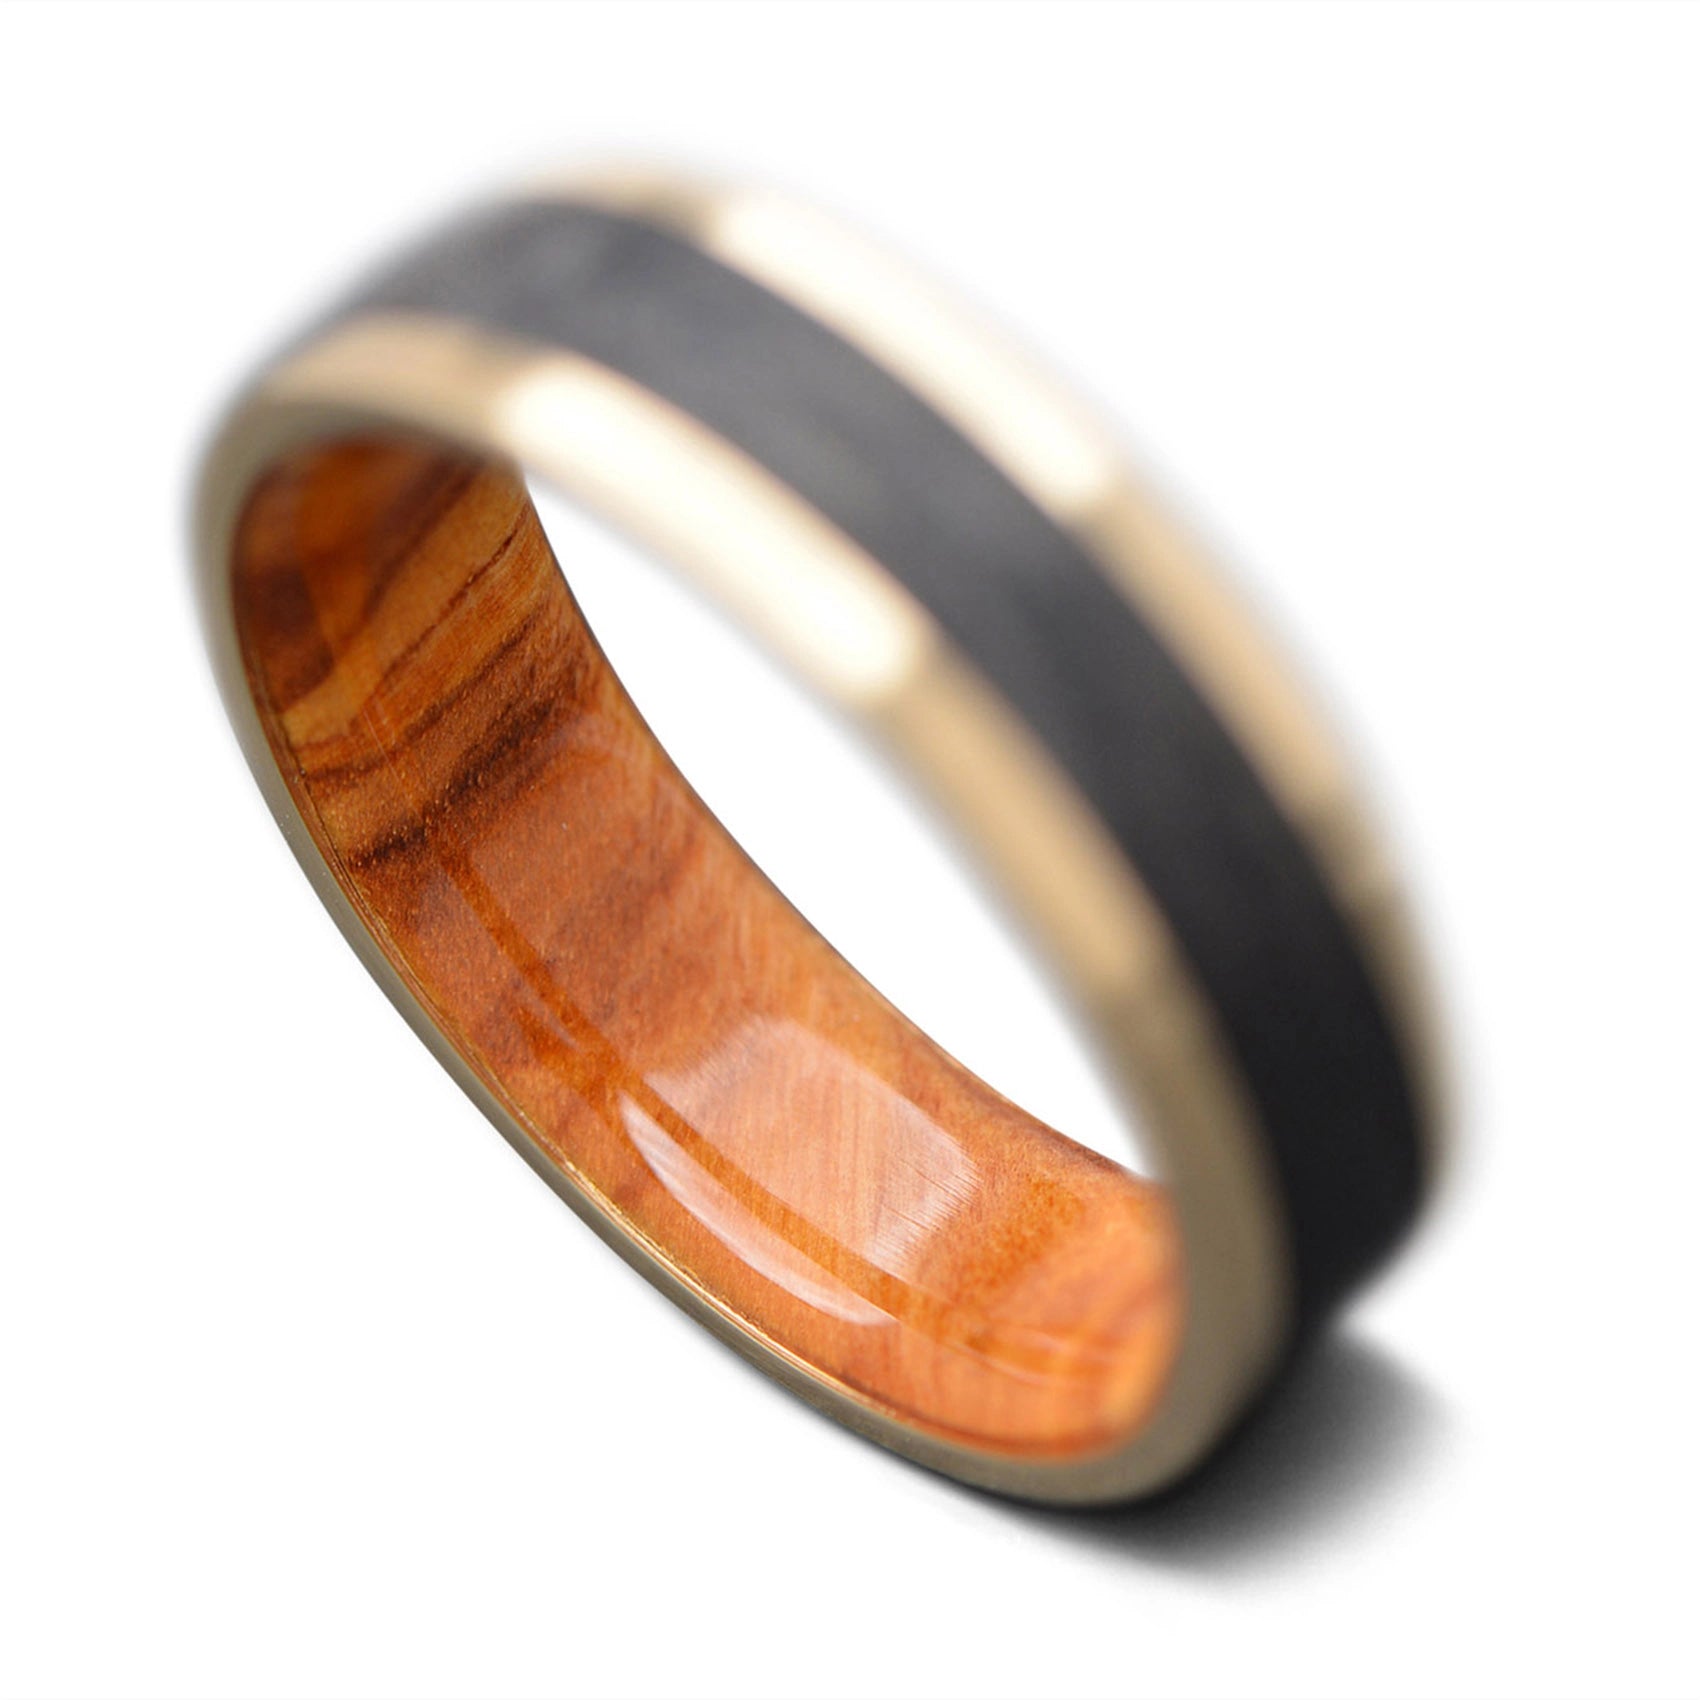 Forged Carbon Ring with Yellow Gold and Wood Sleeve Men's Wedding Band